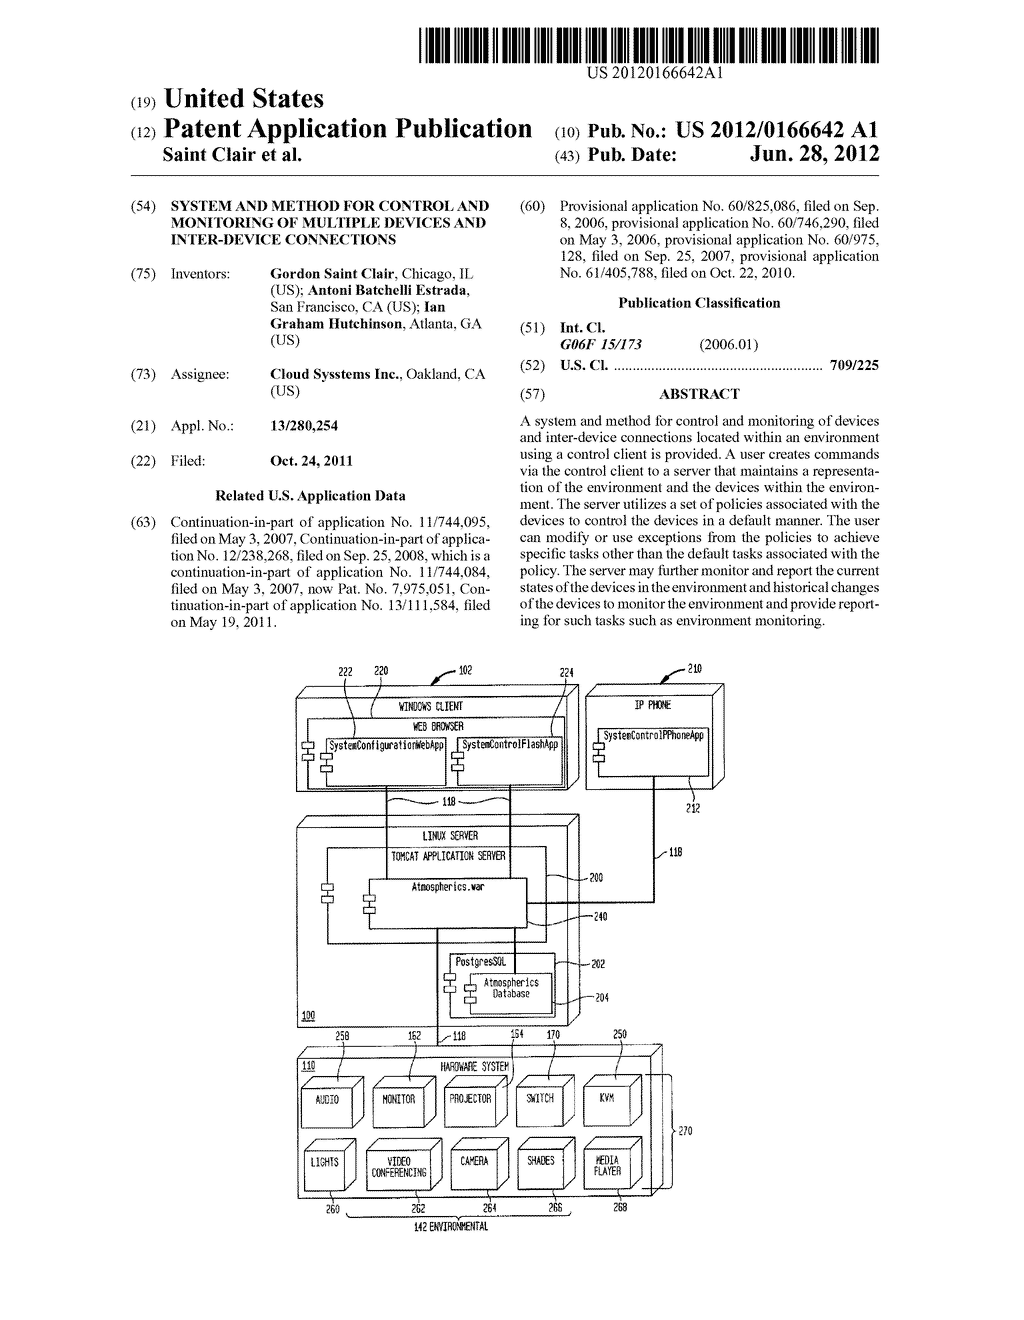 System and Method for Control and Monitoring of Multiple Devices and     Inter-Device Connections - diagram, schematic, and image 01